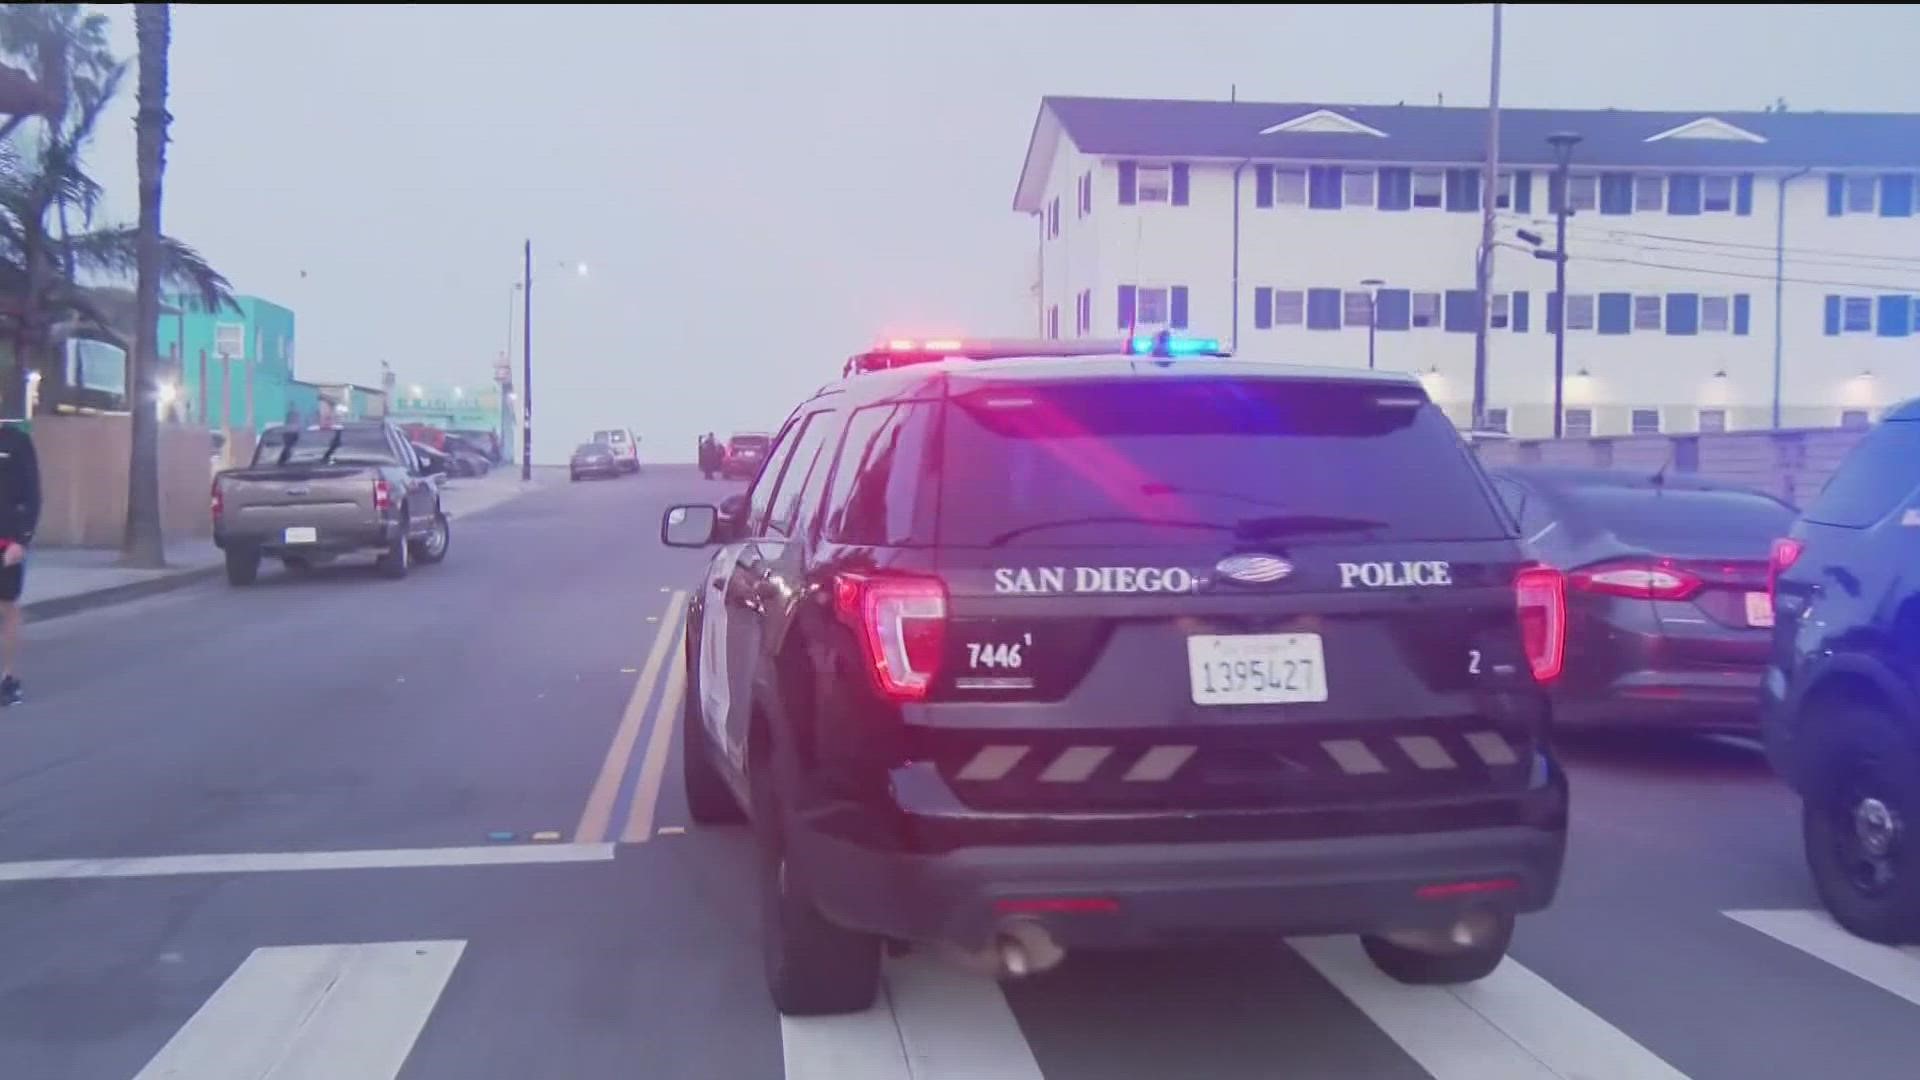 Detectives with the San Diego Police Department are working with authorities in Texas to extradite a man suspected of shooting a woman to death at Pacific Beach.